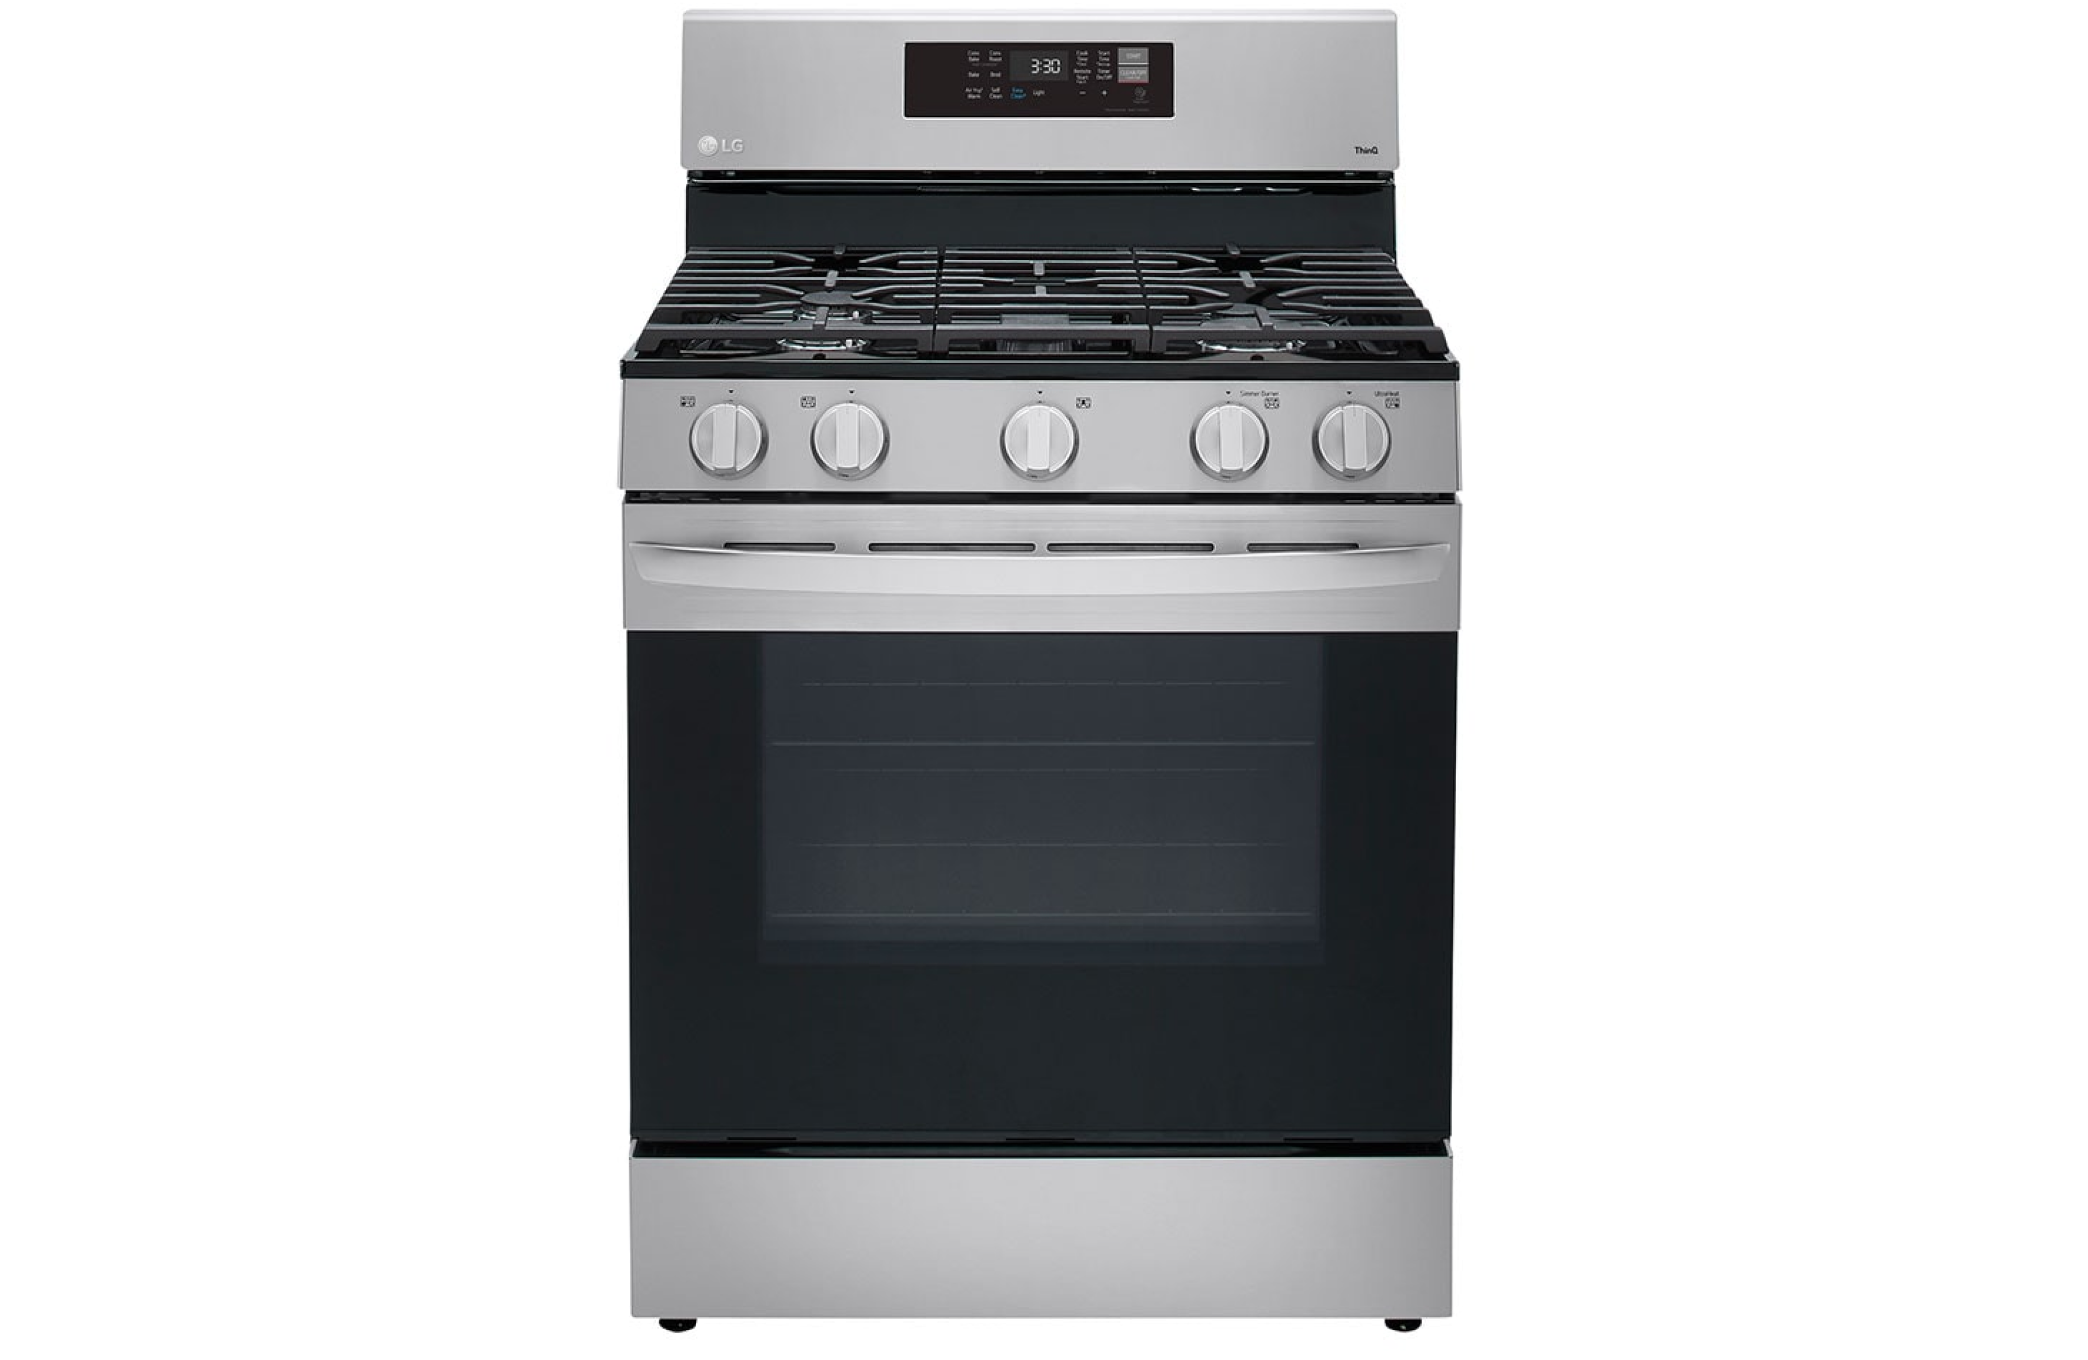 LG 5.8 cu ft. Smart Wi-Fi Enabled Fan Convection Gas Range with Air Fry & EasyClean